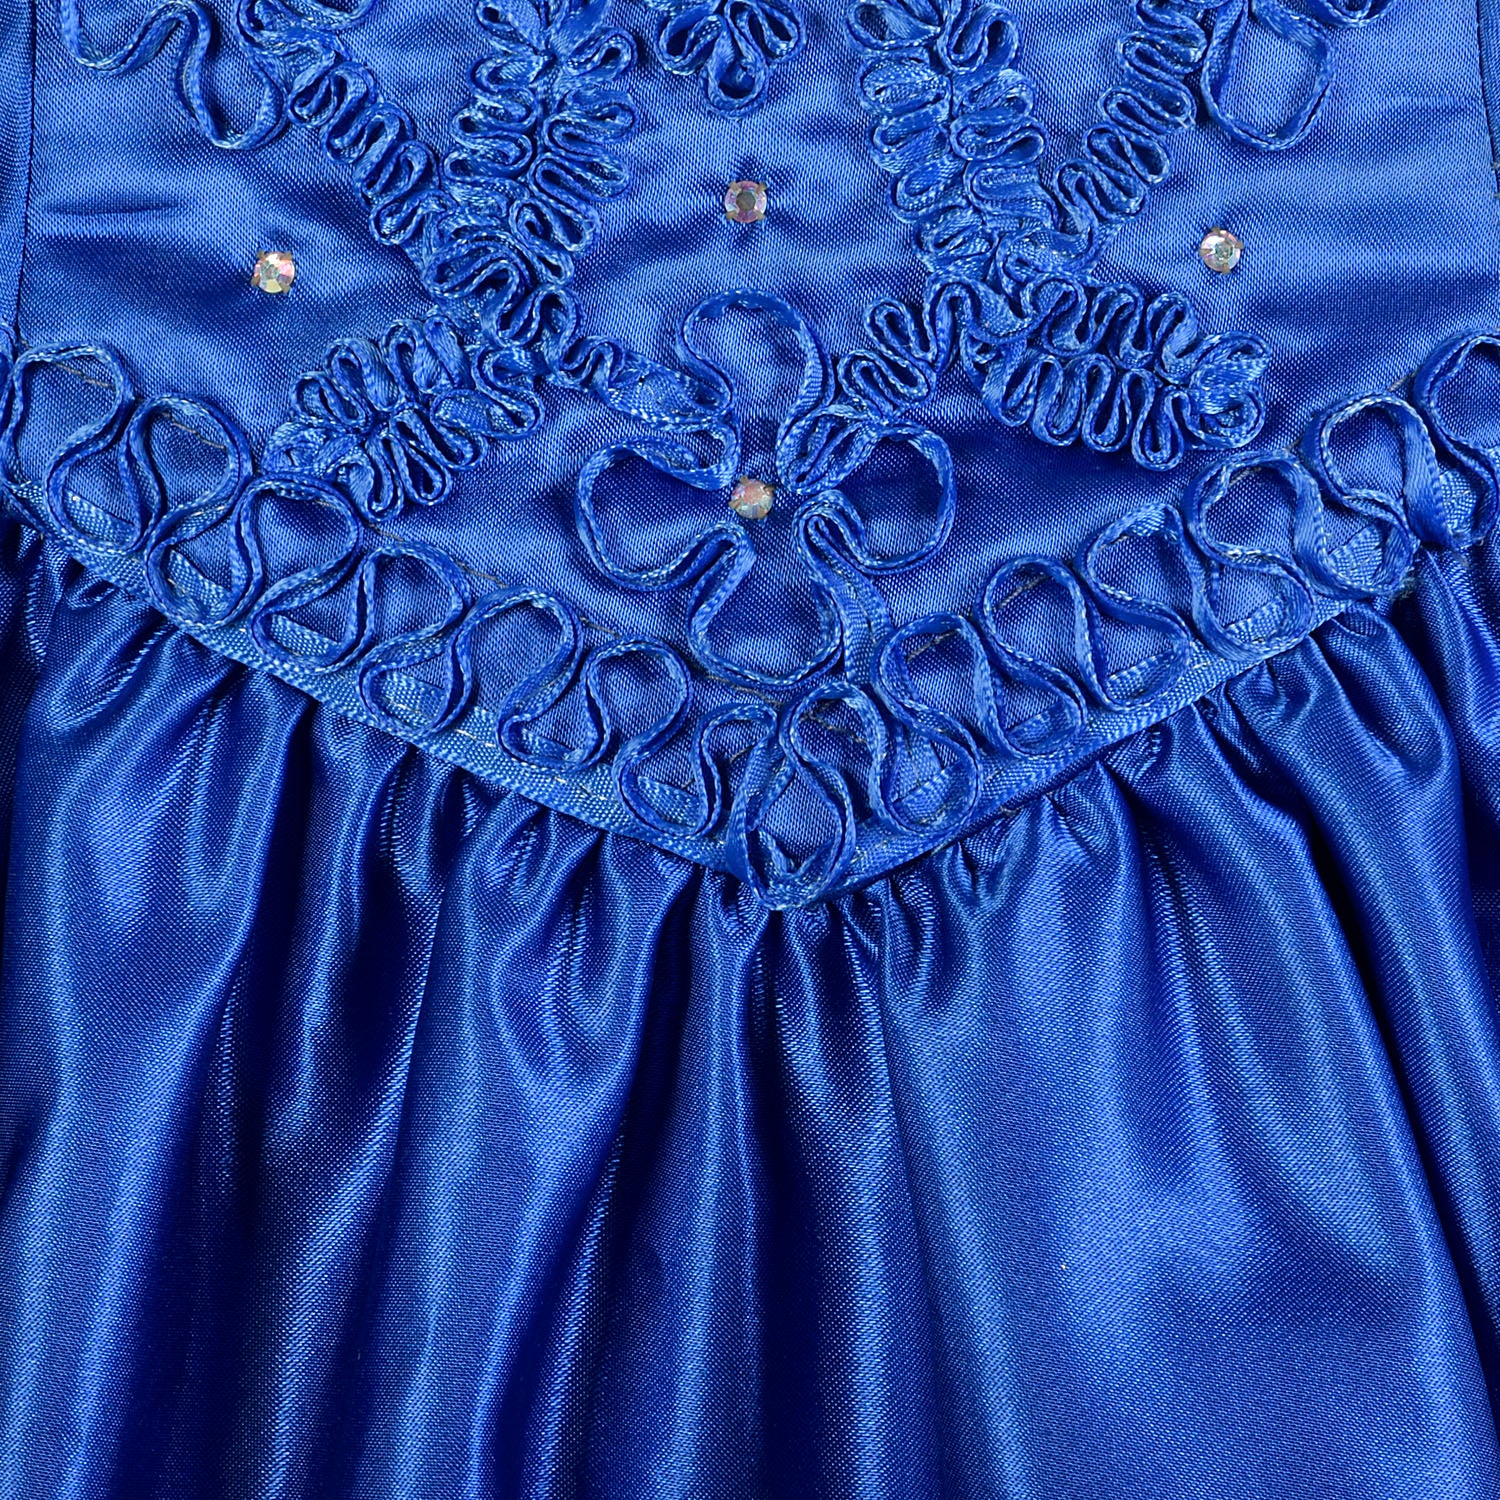 Large 1980s Mike Benet Formals Blue Ribbon Puff Sleeve Prom Dress